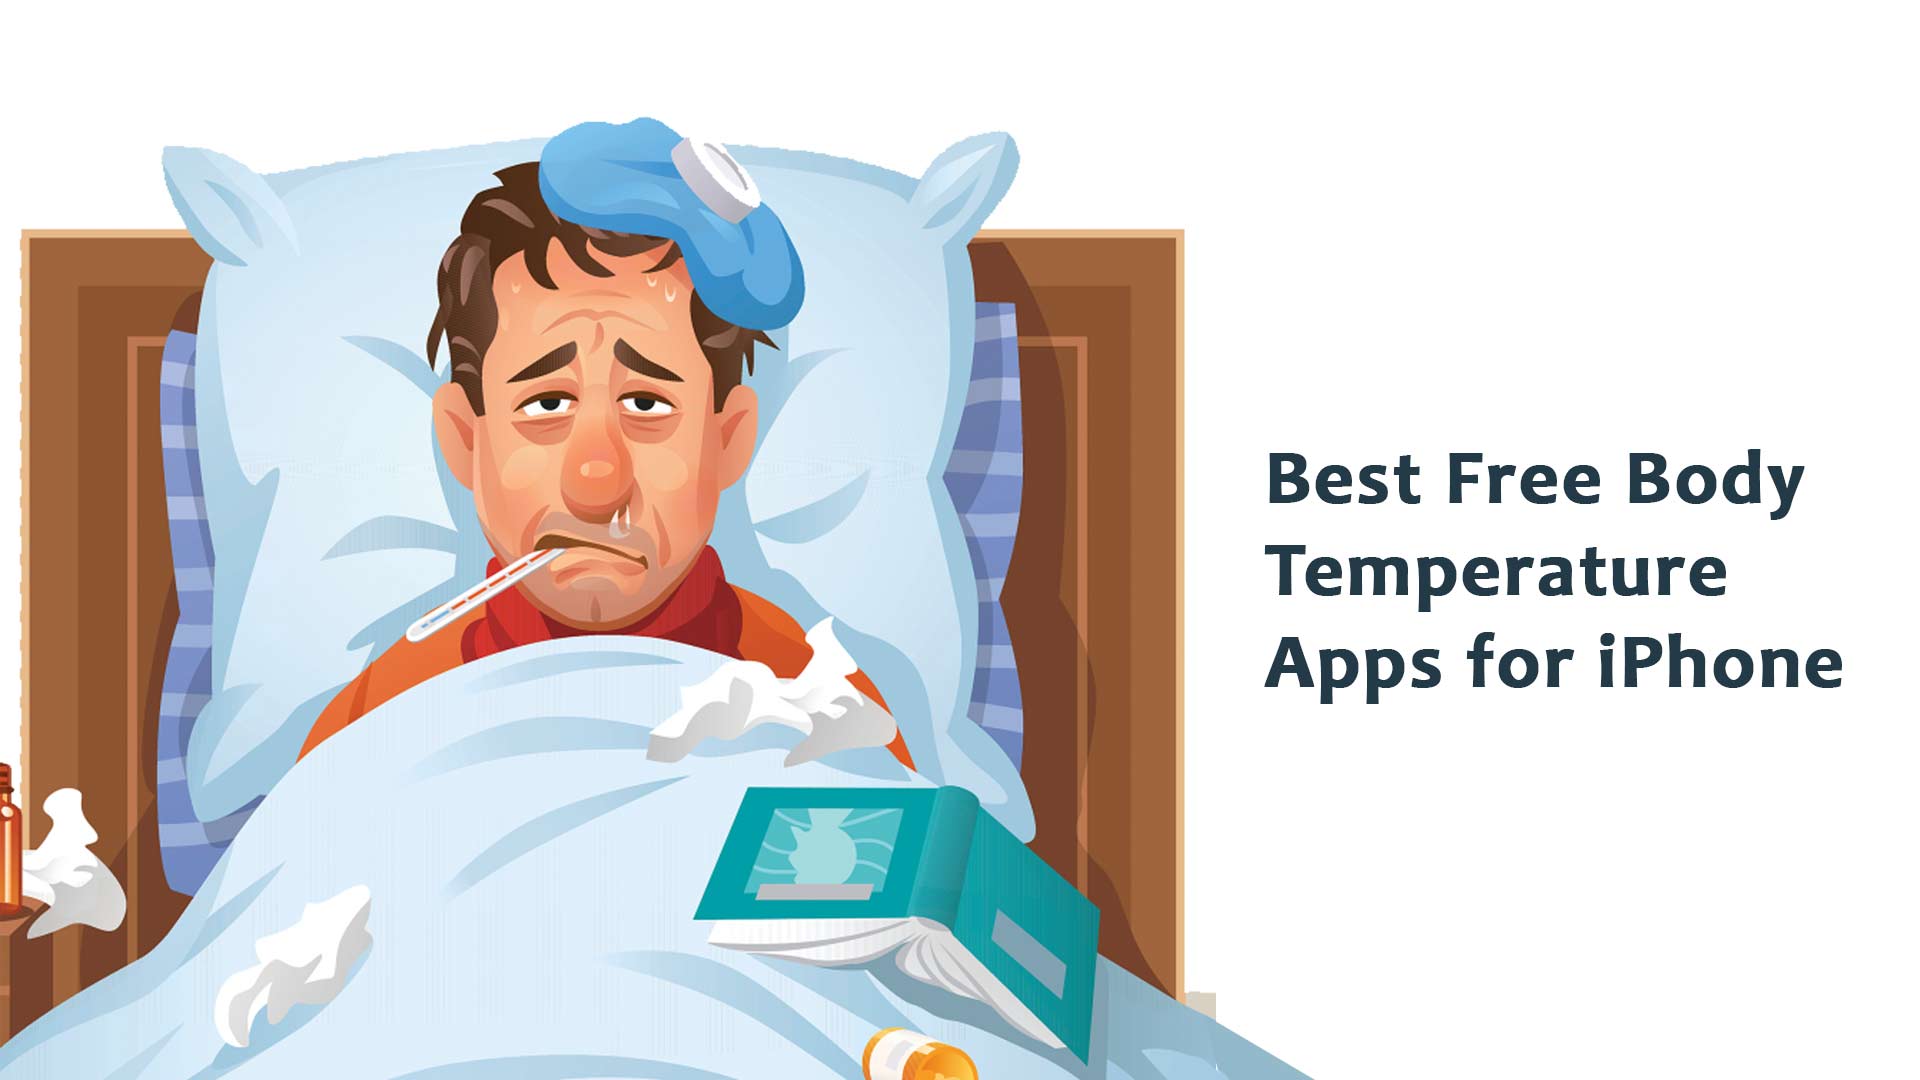 18 Best free body temperature apps for iPhone – Thermometers on hand